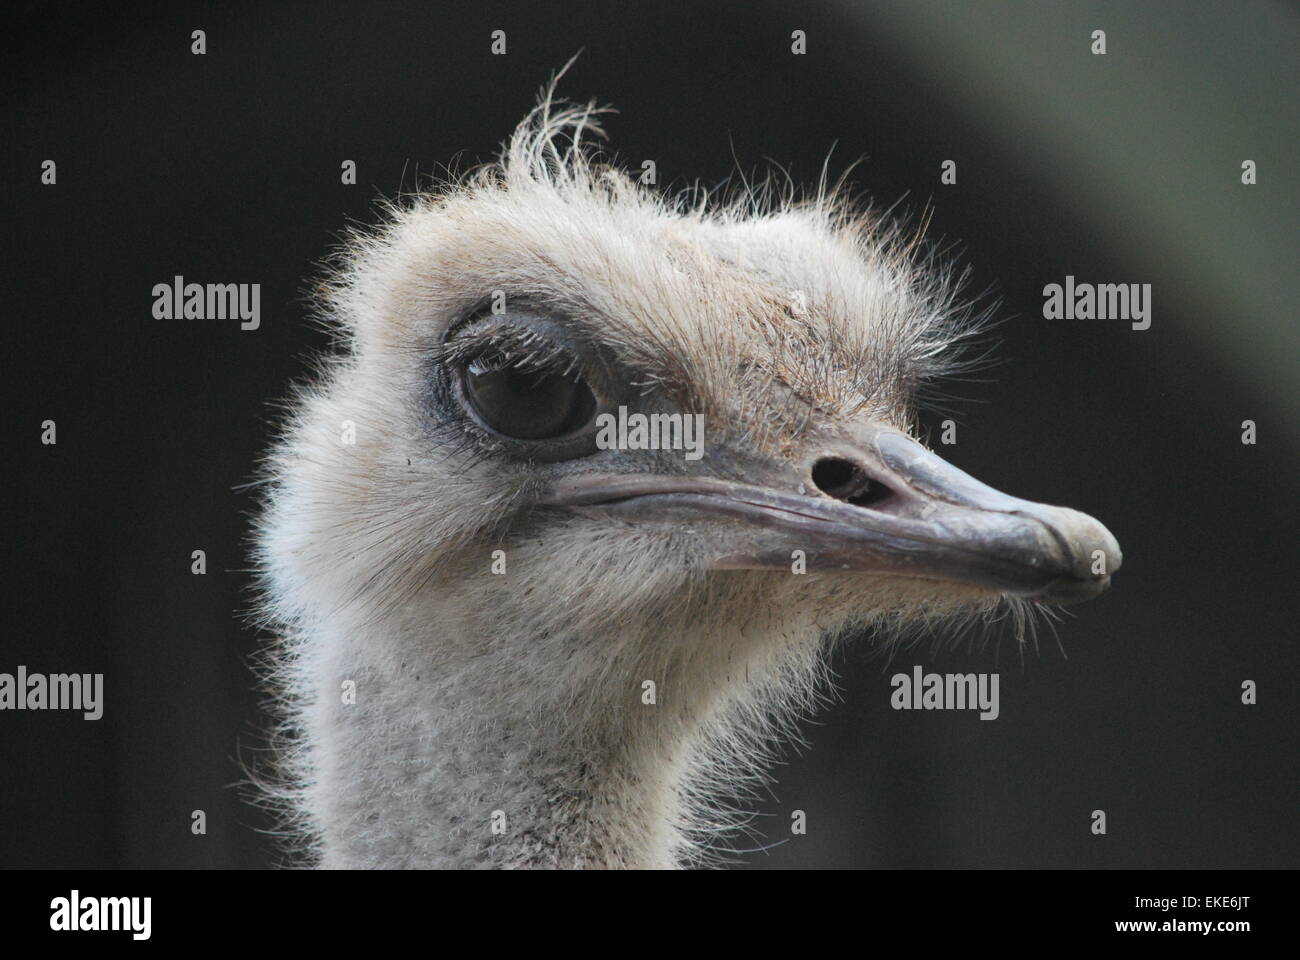 Ostrich face close up Stock Photo